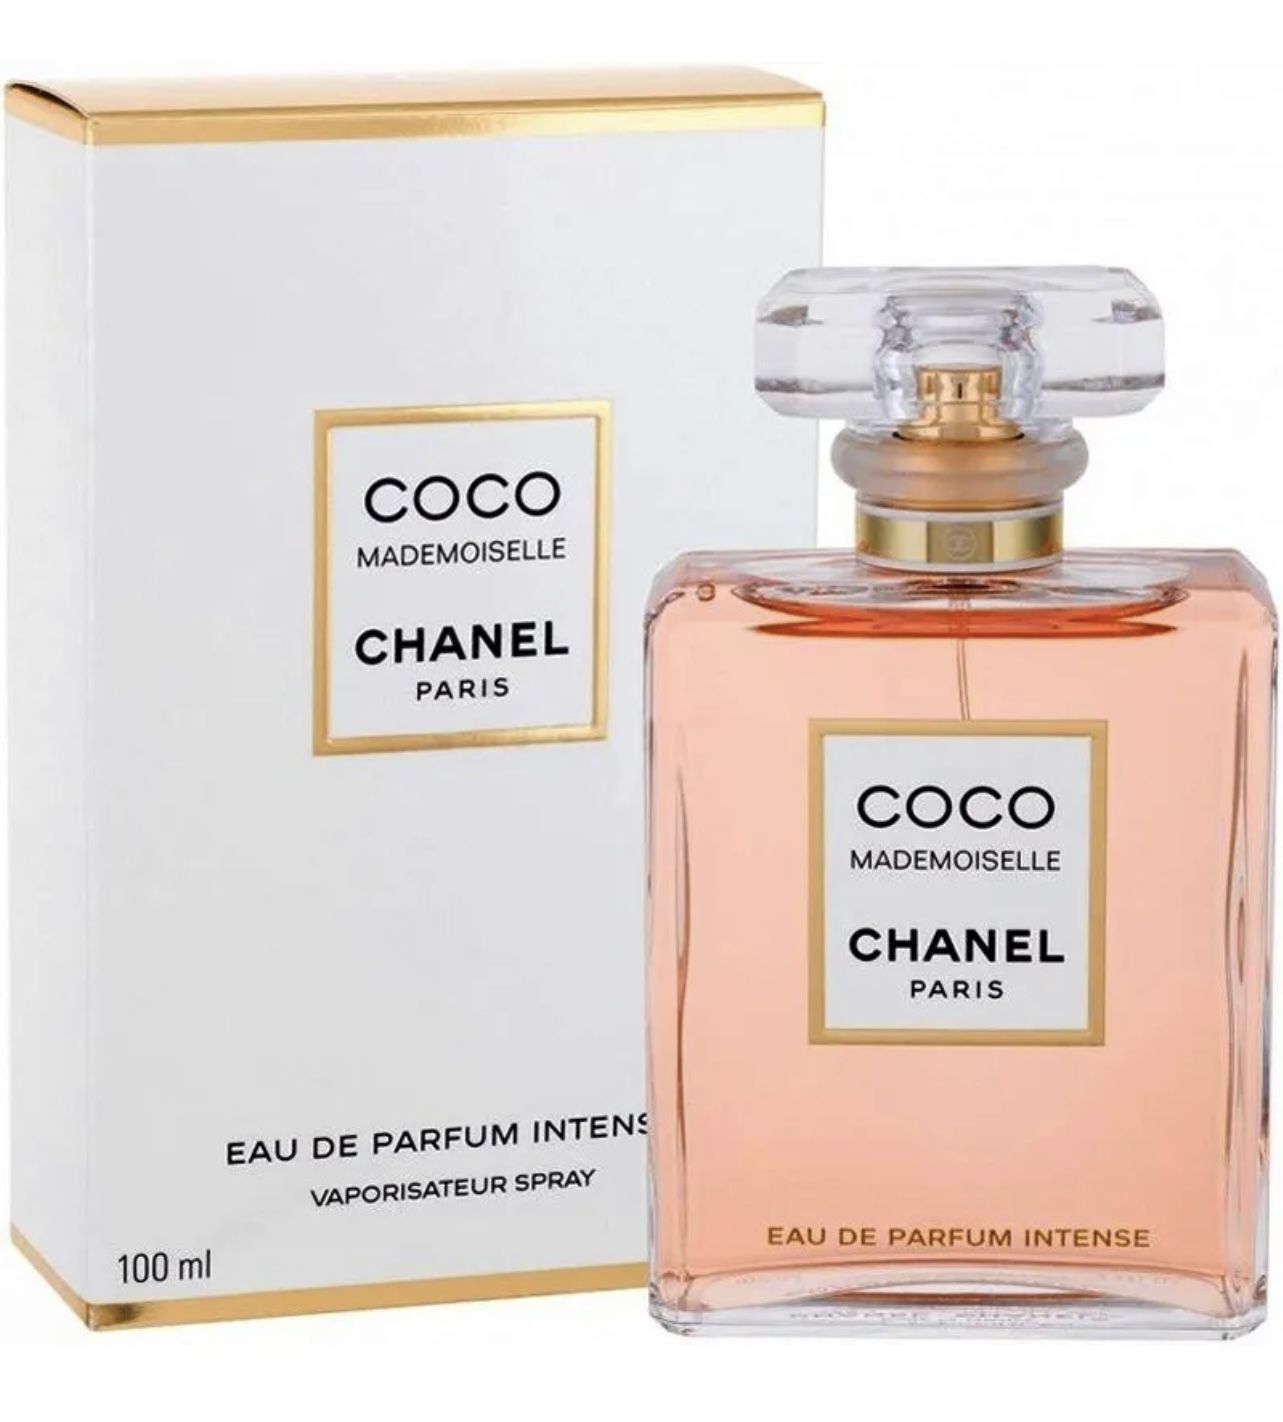 Coco Mademoiselle Intense by Chanel Eau De Parfum 3.4 fluid oz. - Brand  New!! for Sale in Rochester, MN - OfferUp